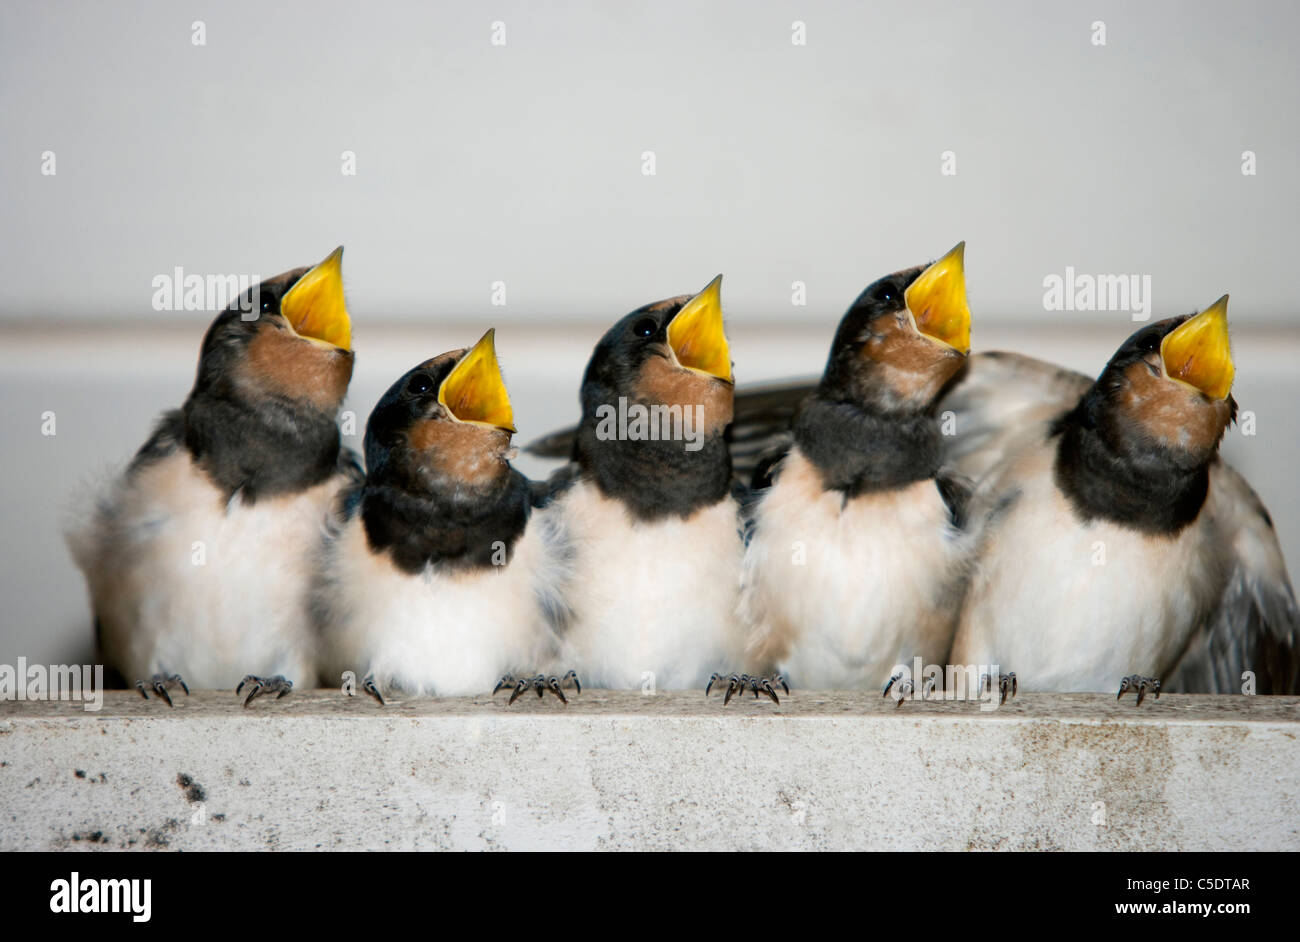 Close-up of baby swallows in a line begging for food with beaks open Stock Photo